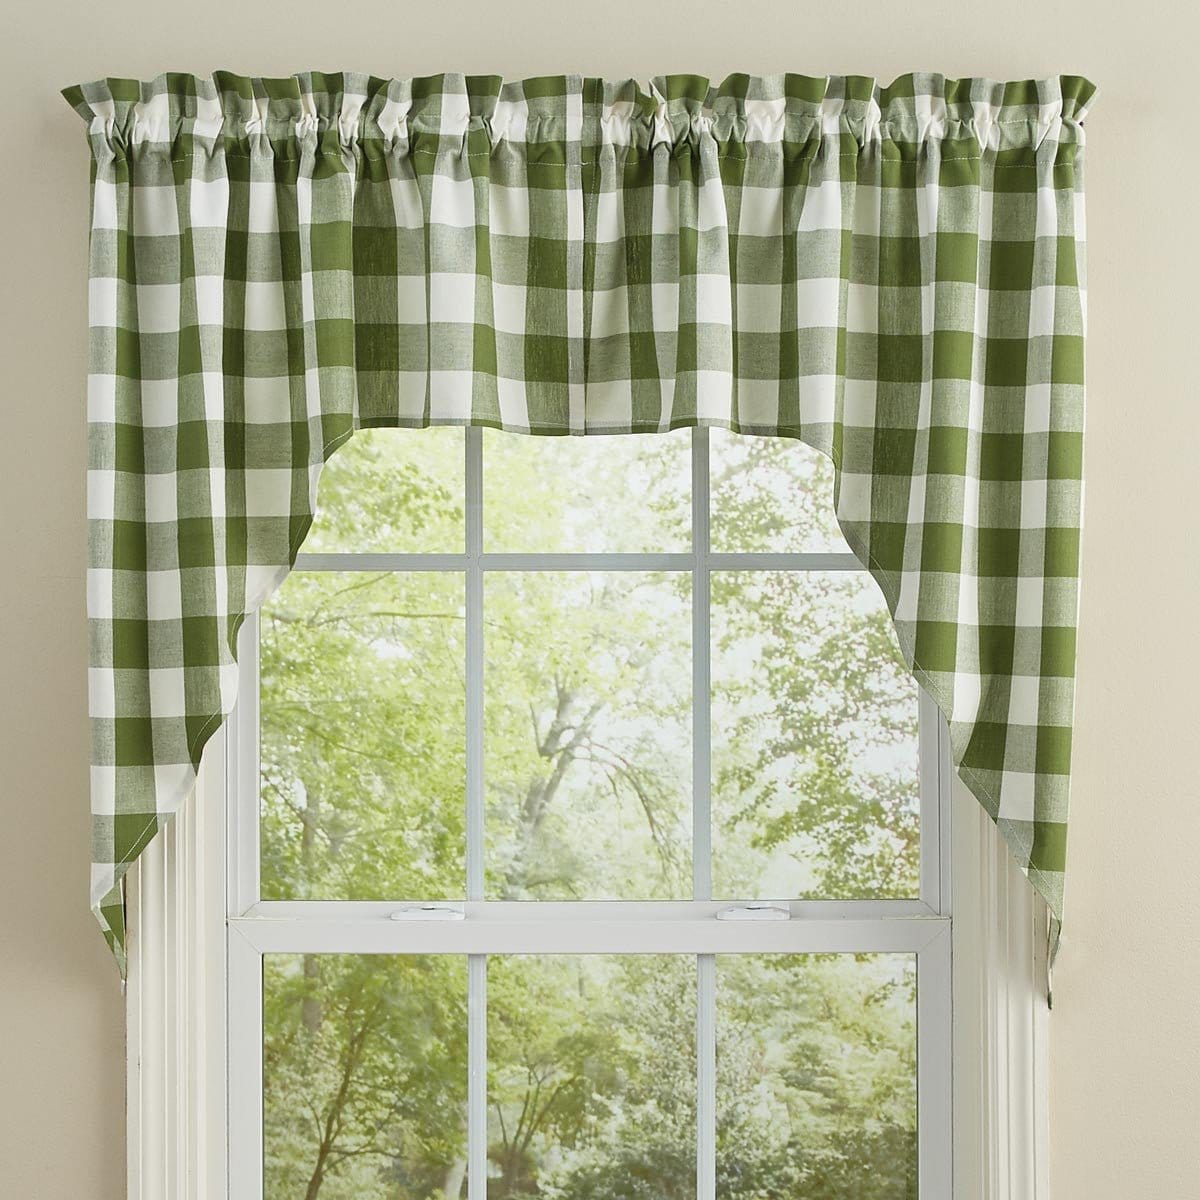 Wicklow Check in Sage Green Swag Pair 36" Long Unlined-Park Designs-The Village Merchant